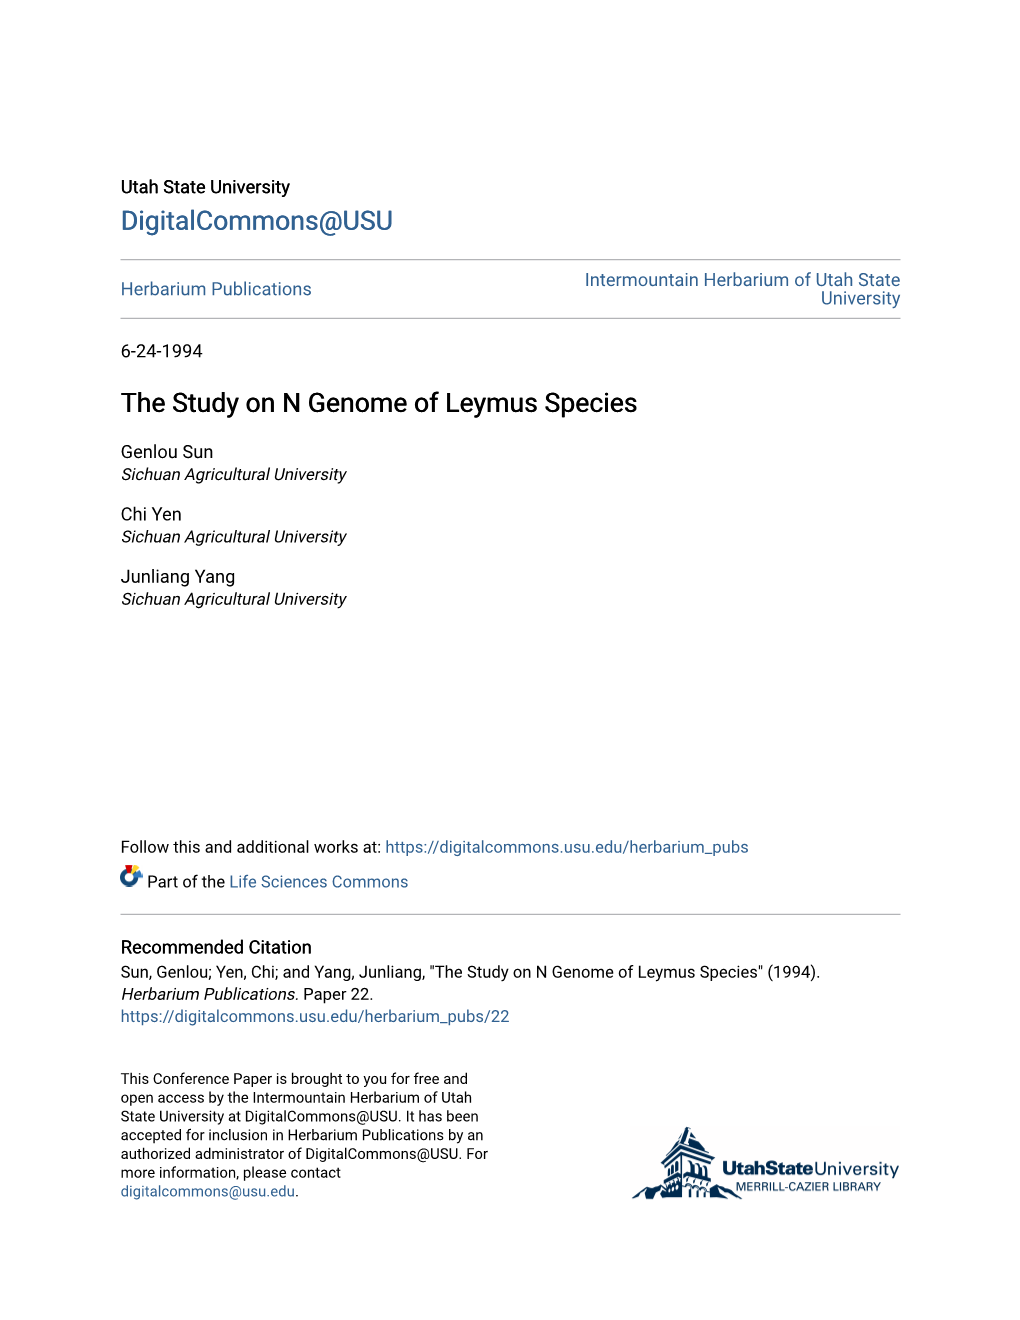 The Study on N Genome of Leymus Species